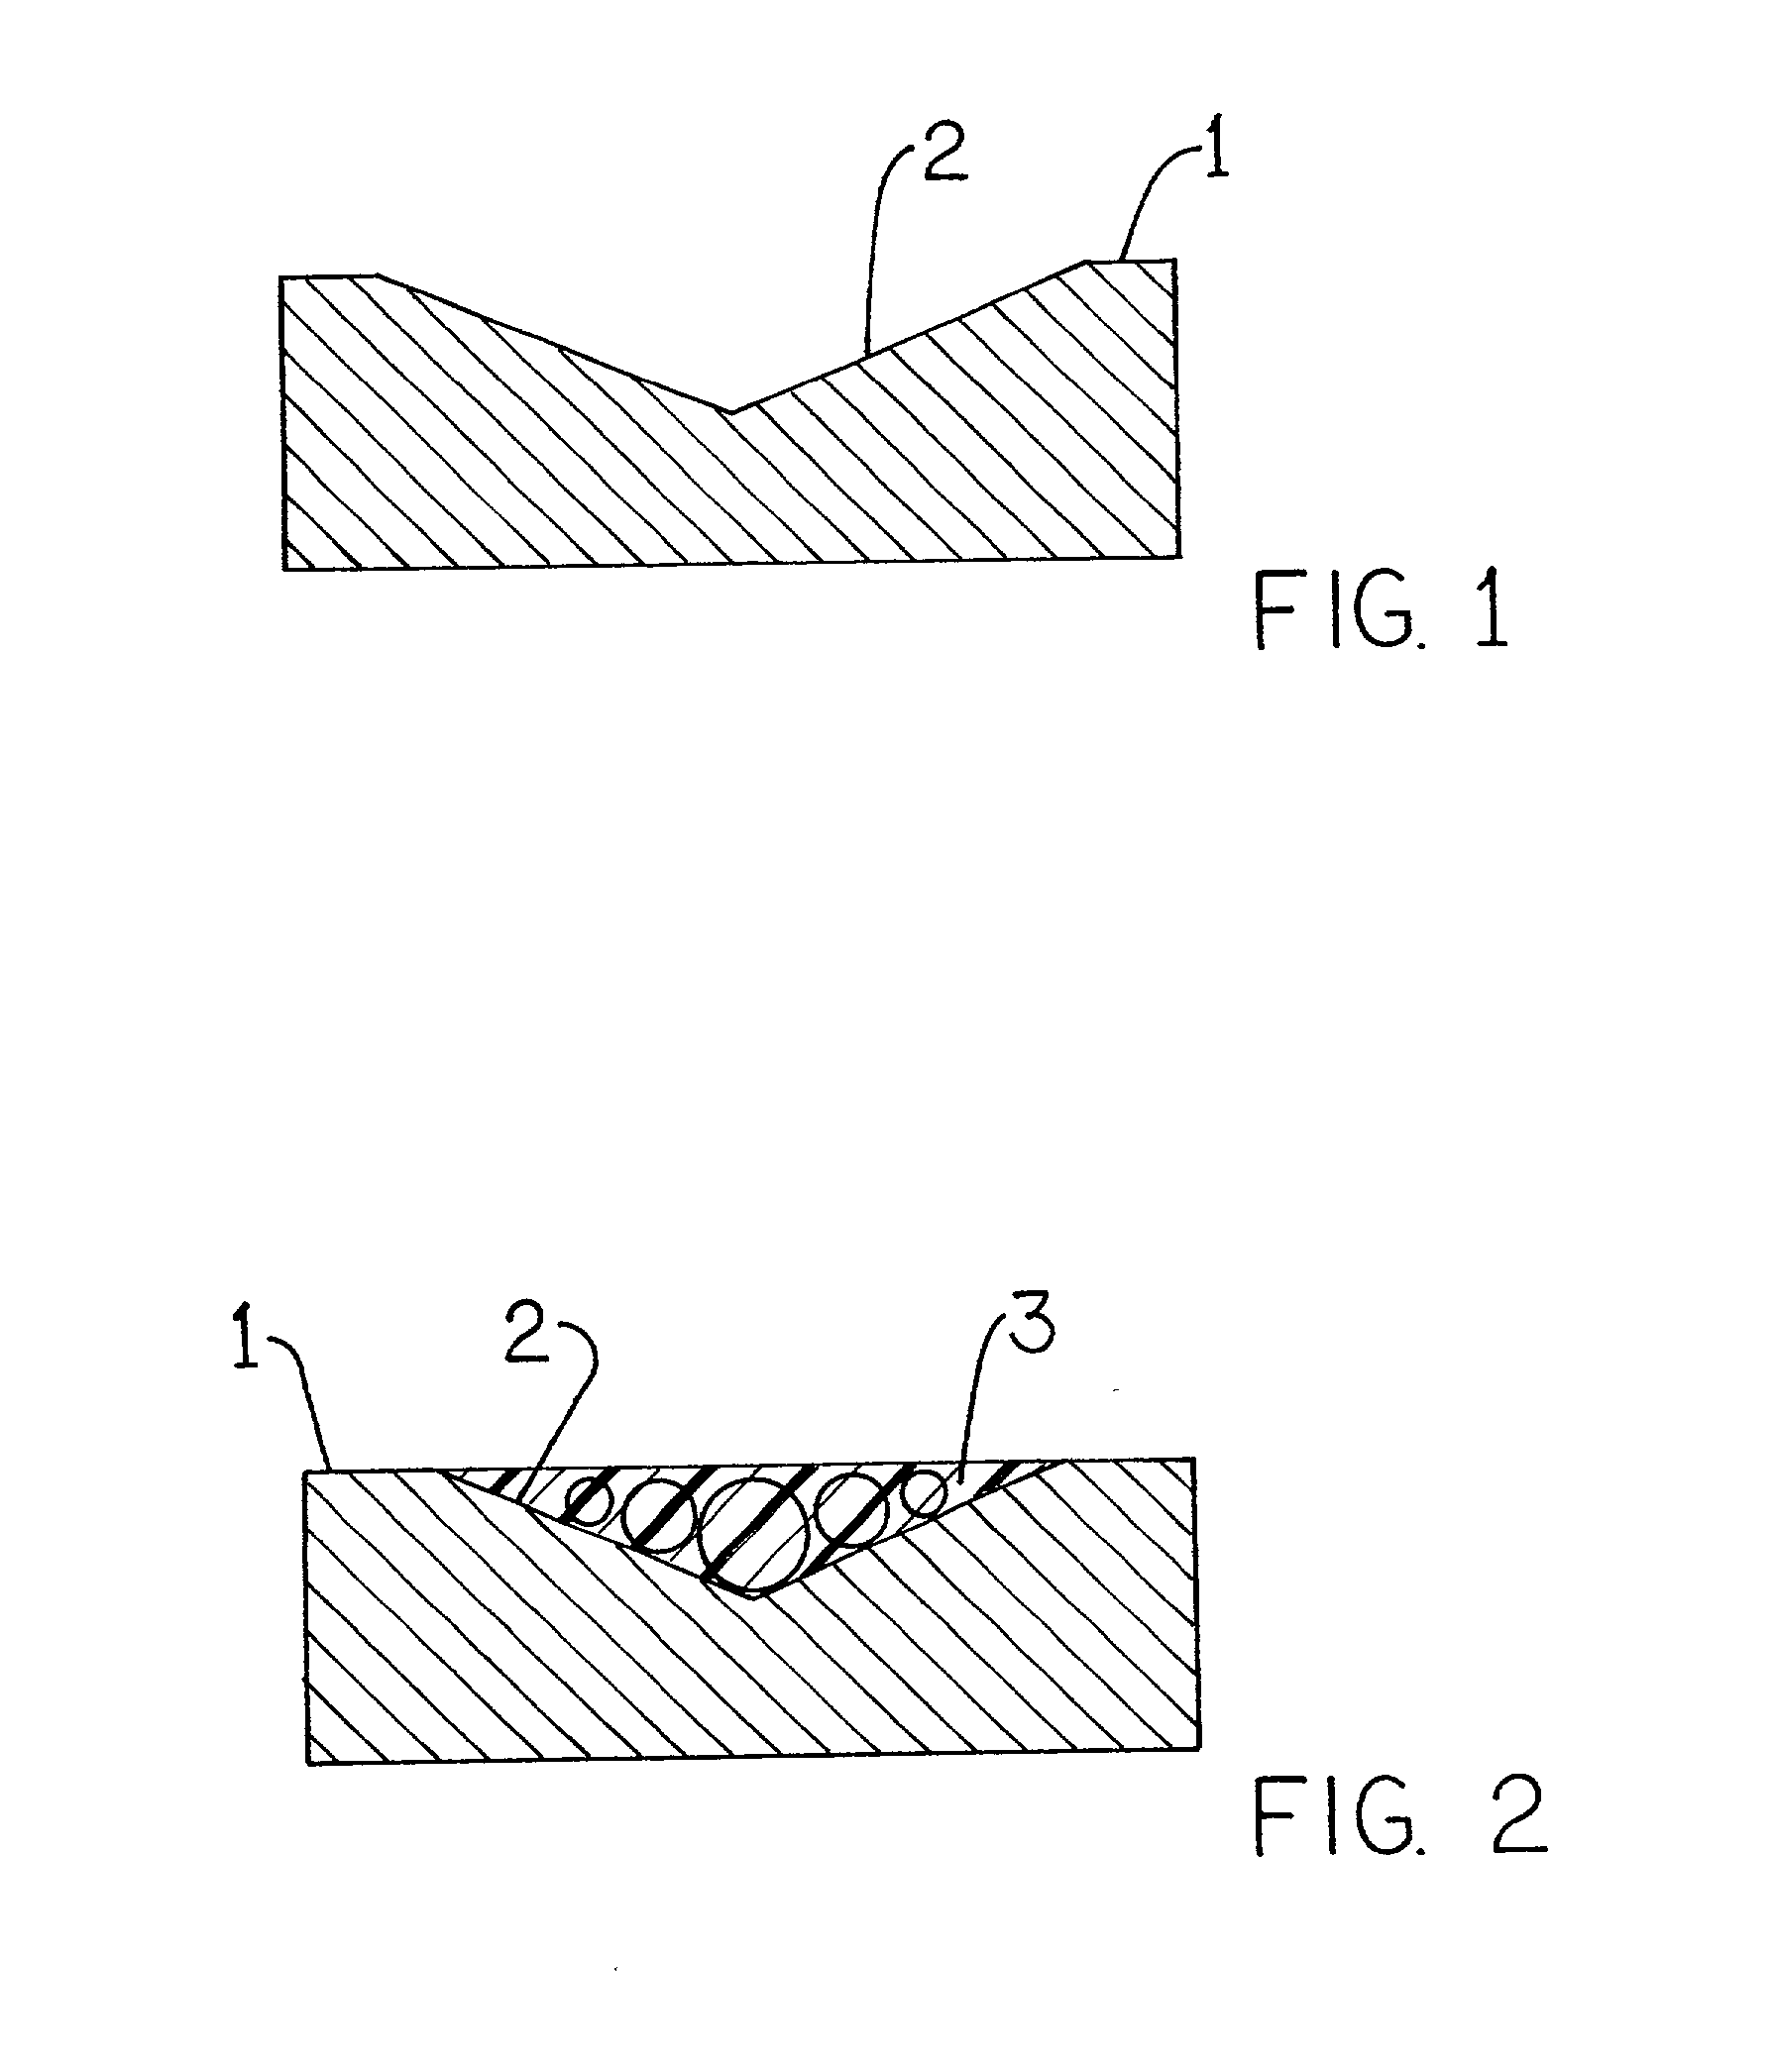 Surface restoration and maintenance composition and method of restoring a surface